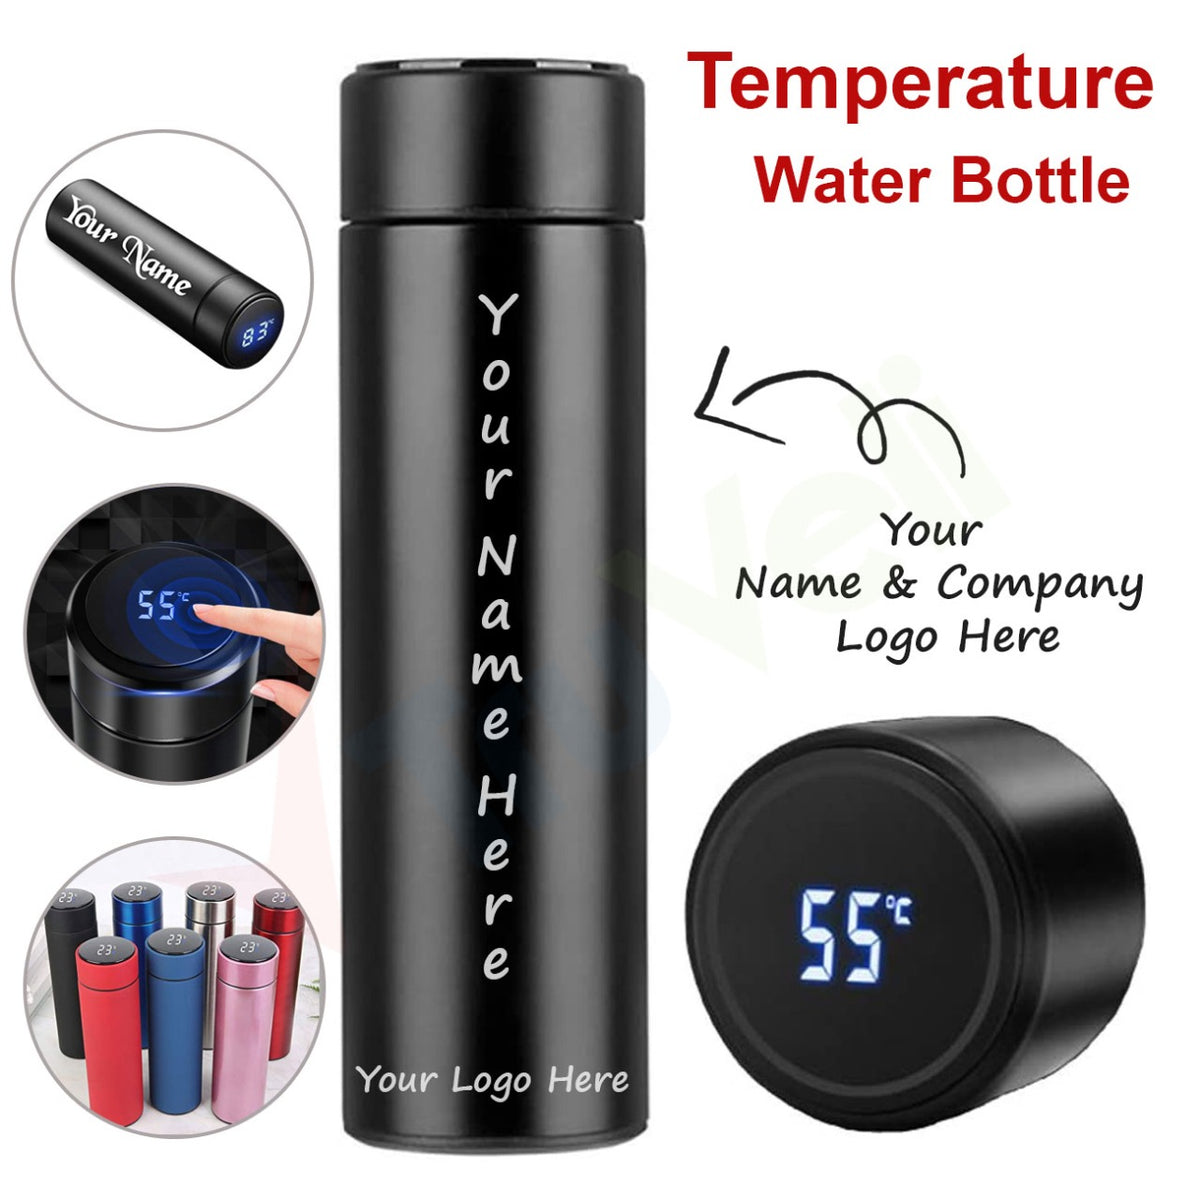 VSITOO Insulated Sports Water Bottle 16oz, LED Temperature Display